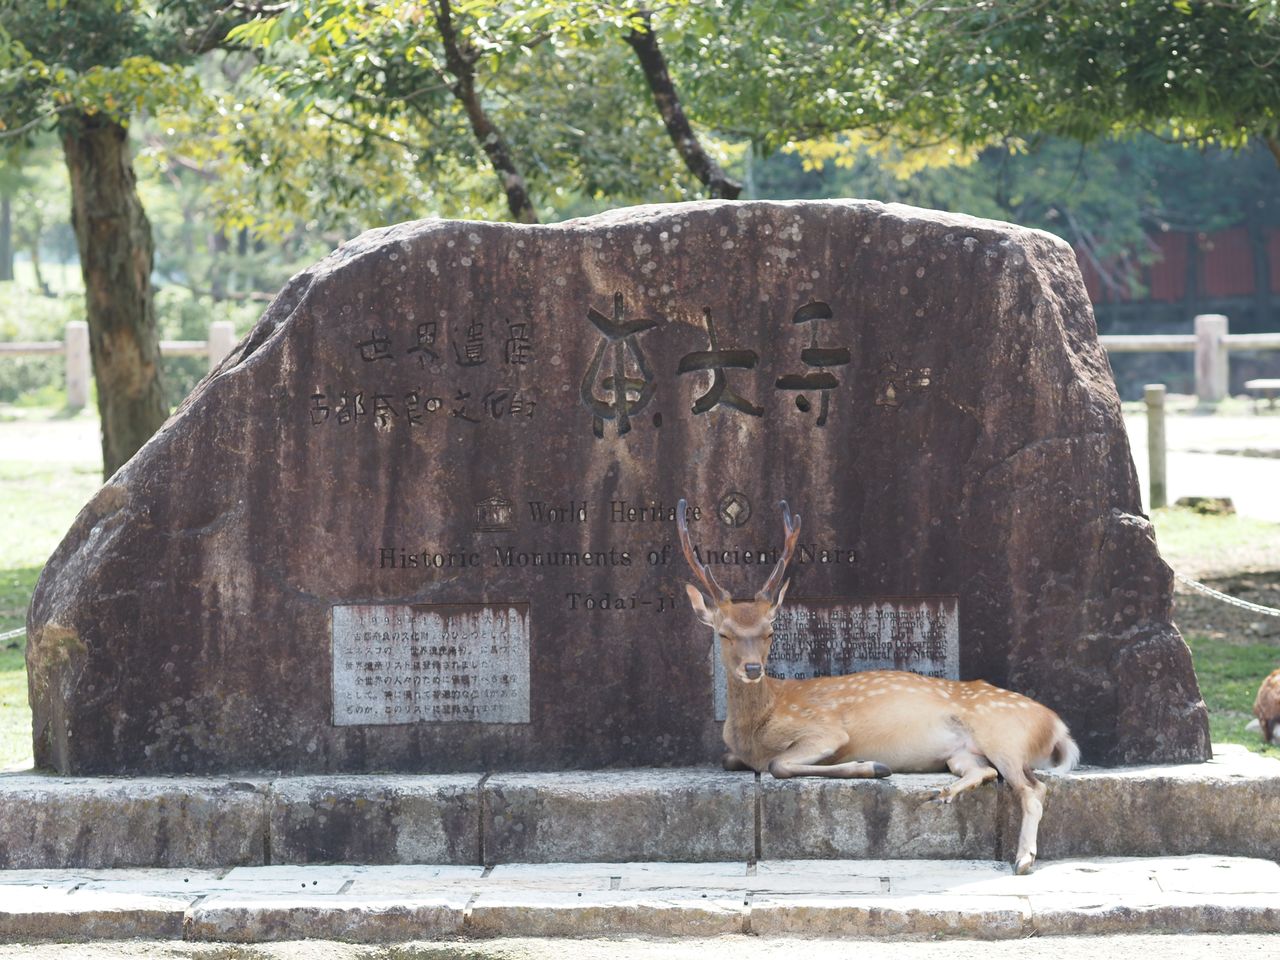 A deer, a symbol of Nara, lounges next to a monument commemorating the ancient capital’s UNESCO listing.